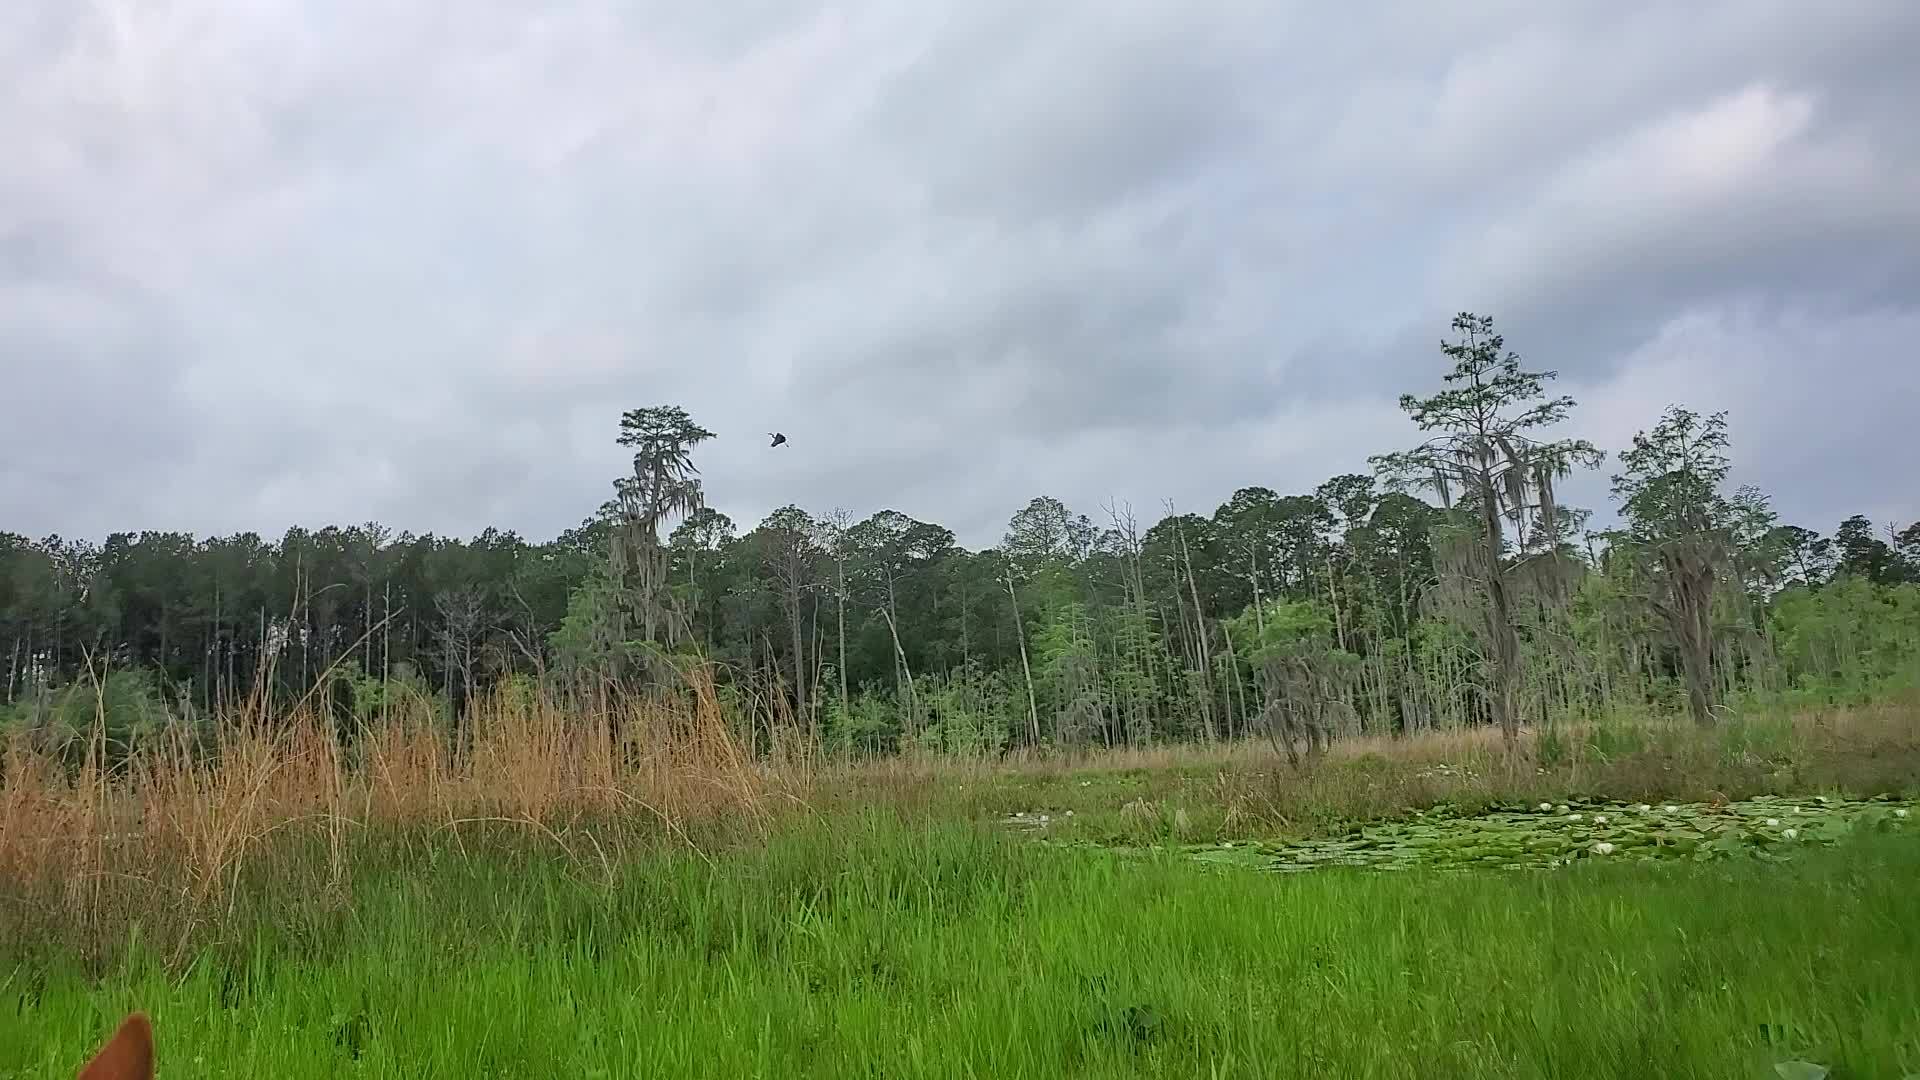 Movie: Heron flying to its tree (22M)